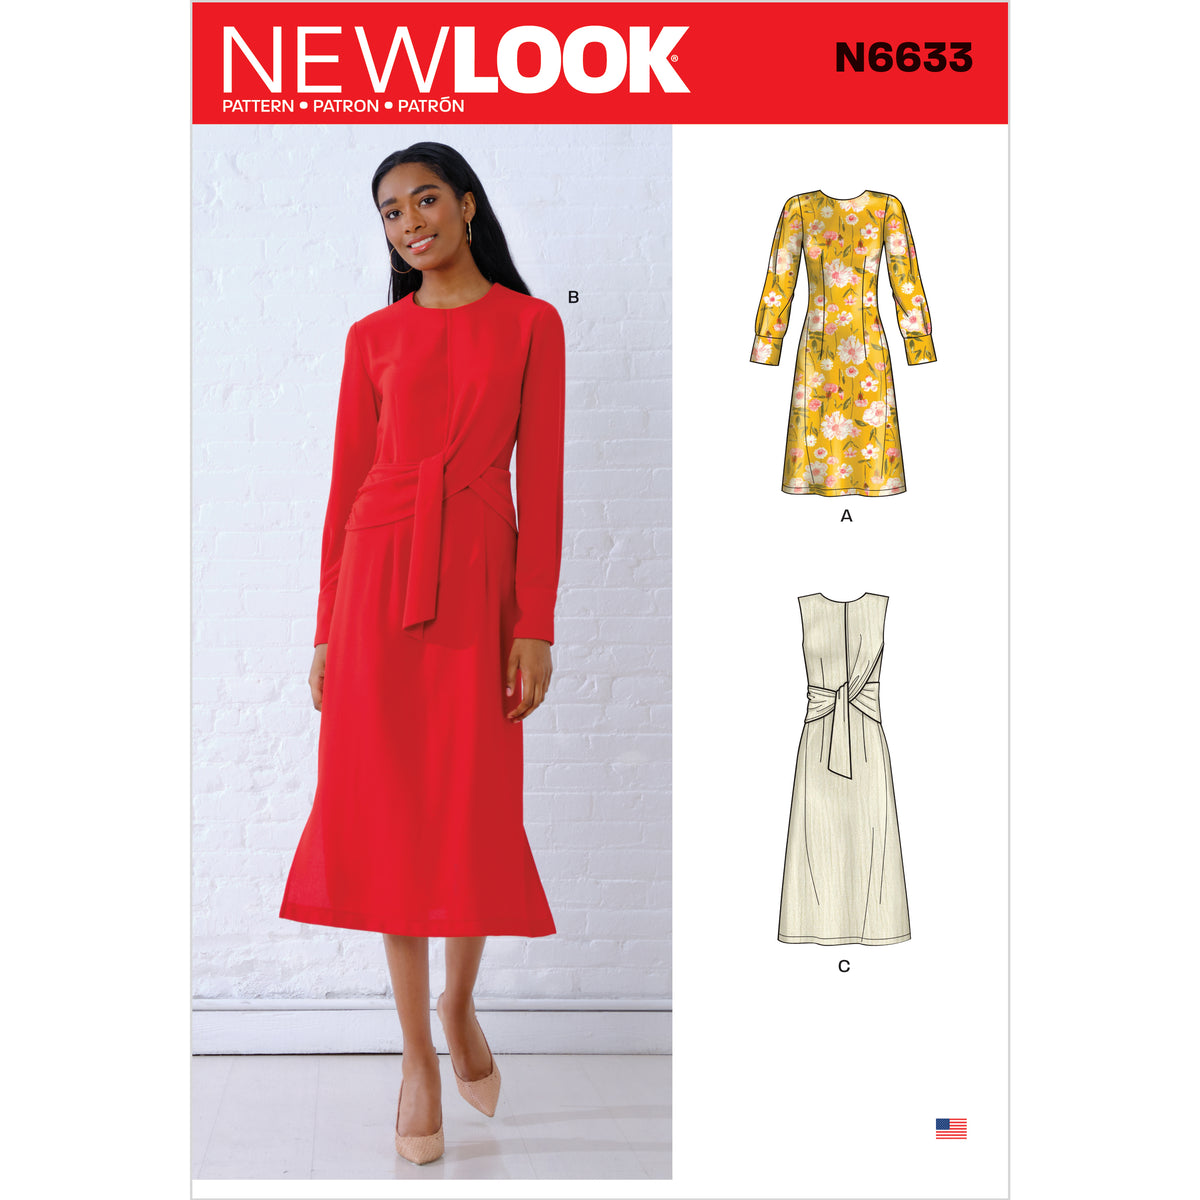 6633 New Look Sewing Pattern N6633 Misses' Dresses with Optional Drape